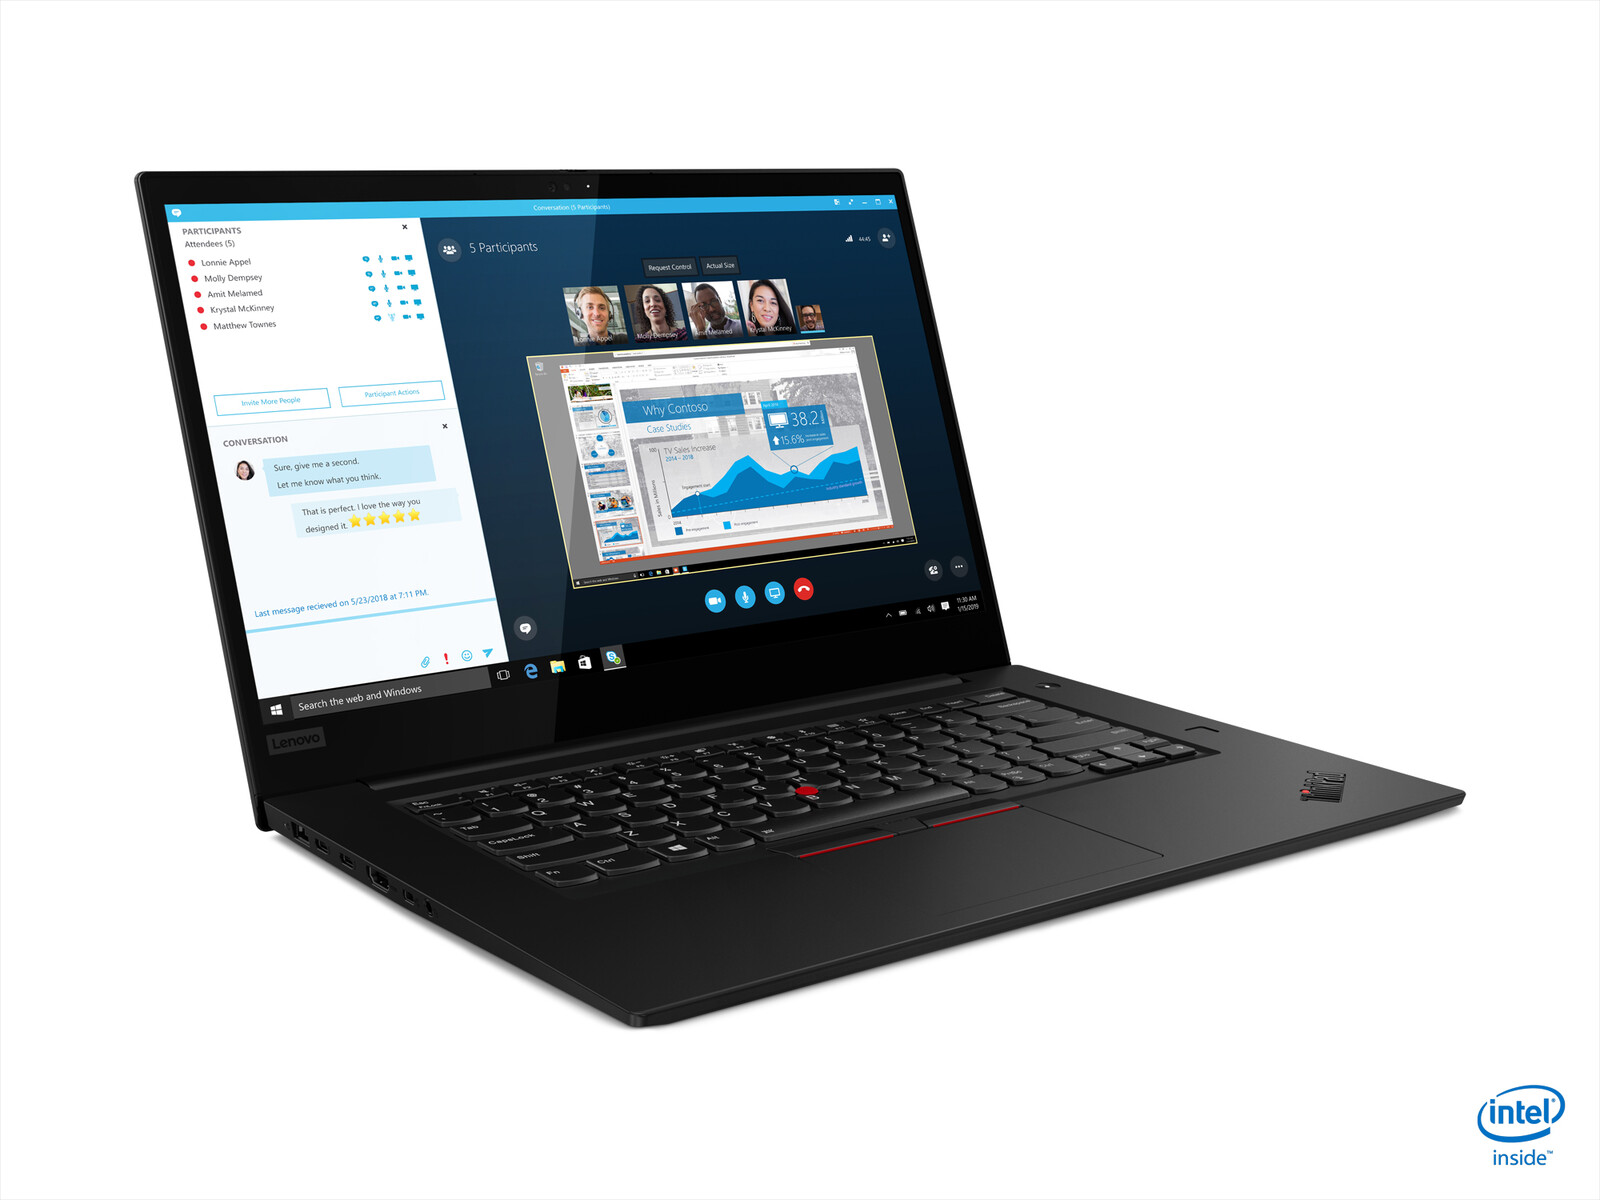 Lenovo ThinkPad X1 Extreme is about to get even more extreme with 